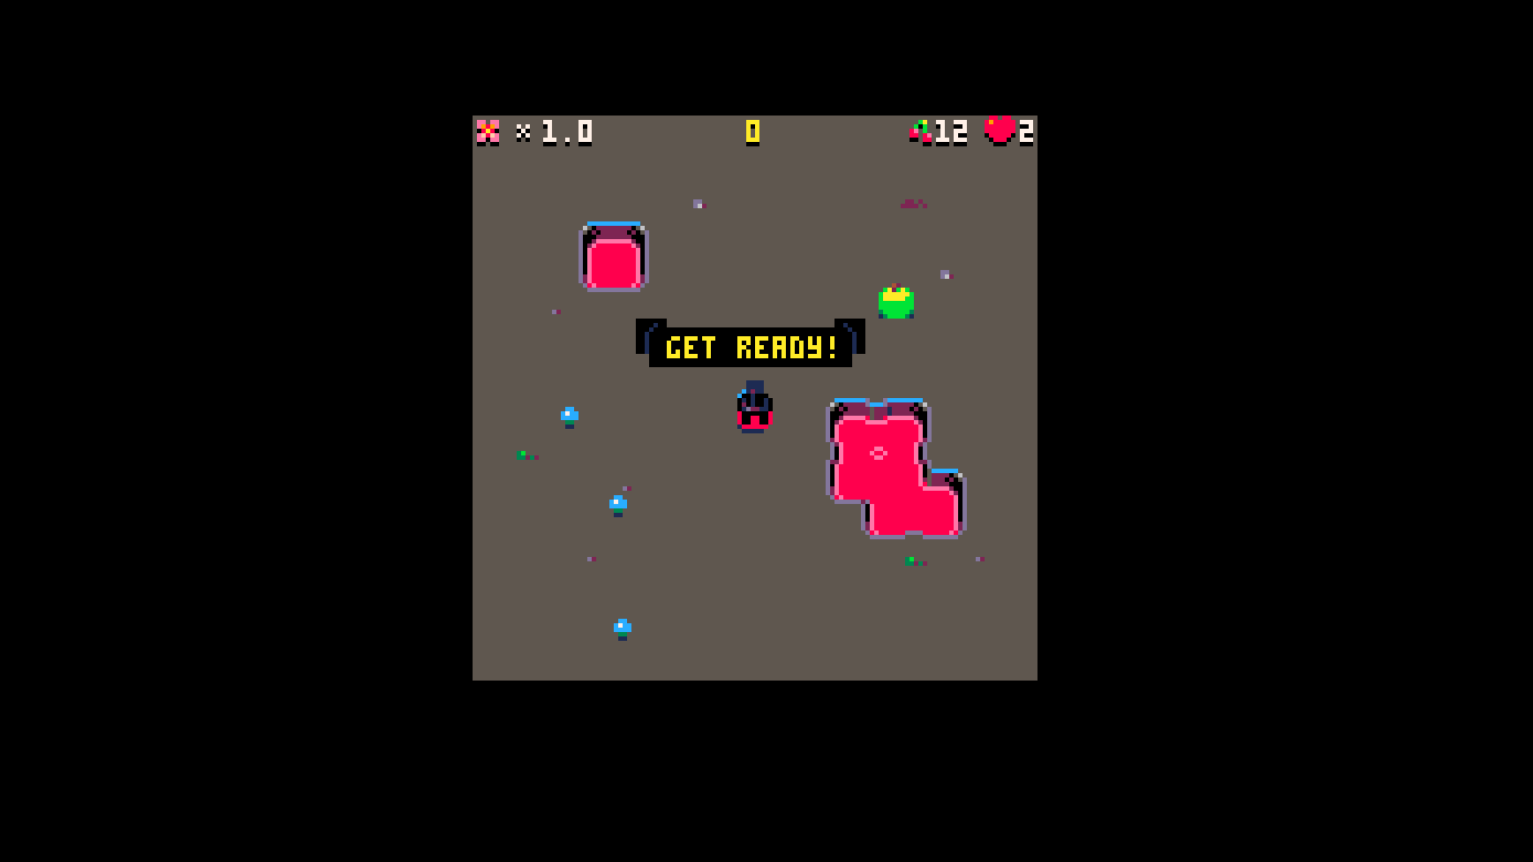 The Pico-8 game Worm Nom Nom featuring bright pink obstacles and a smaller pink square worm character.